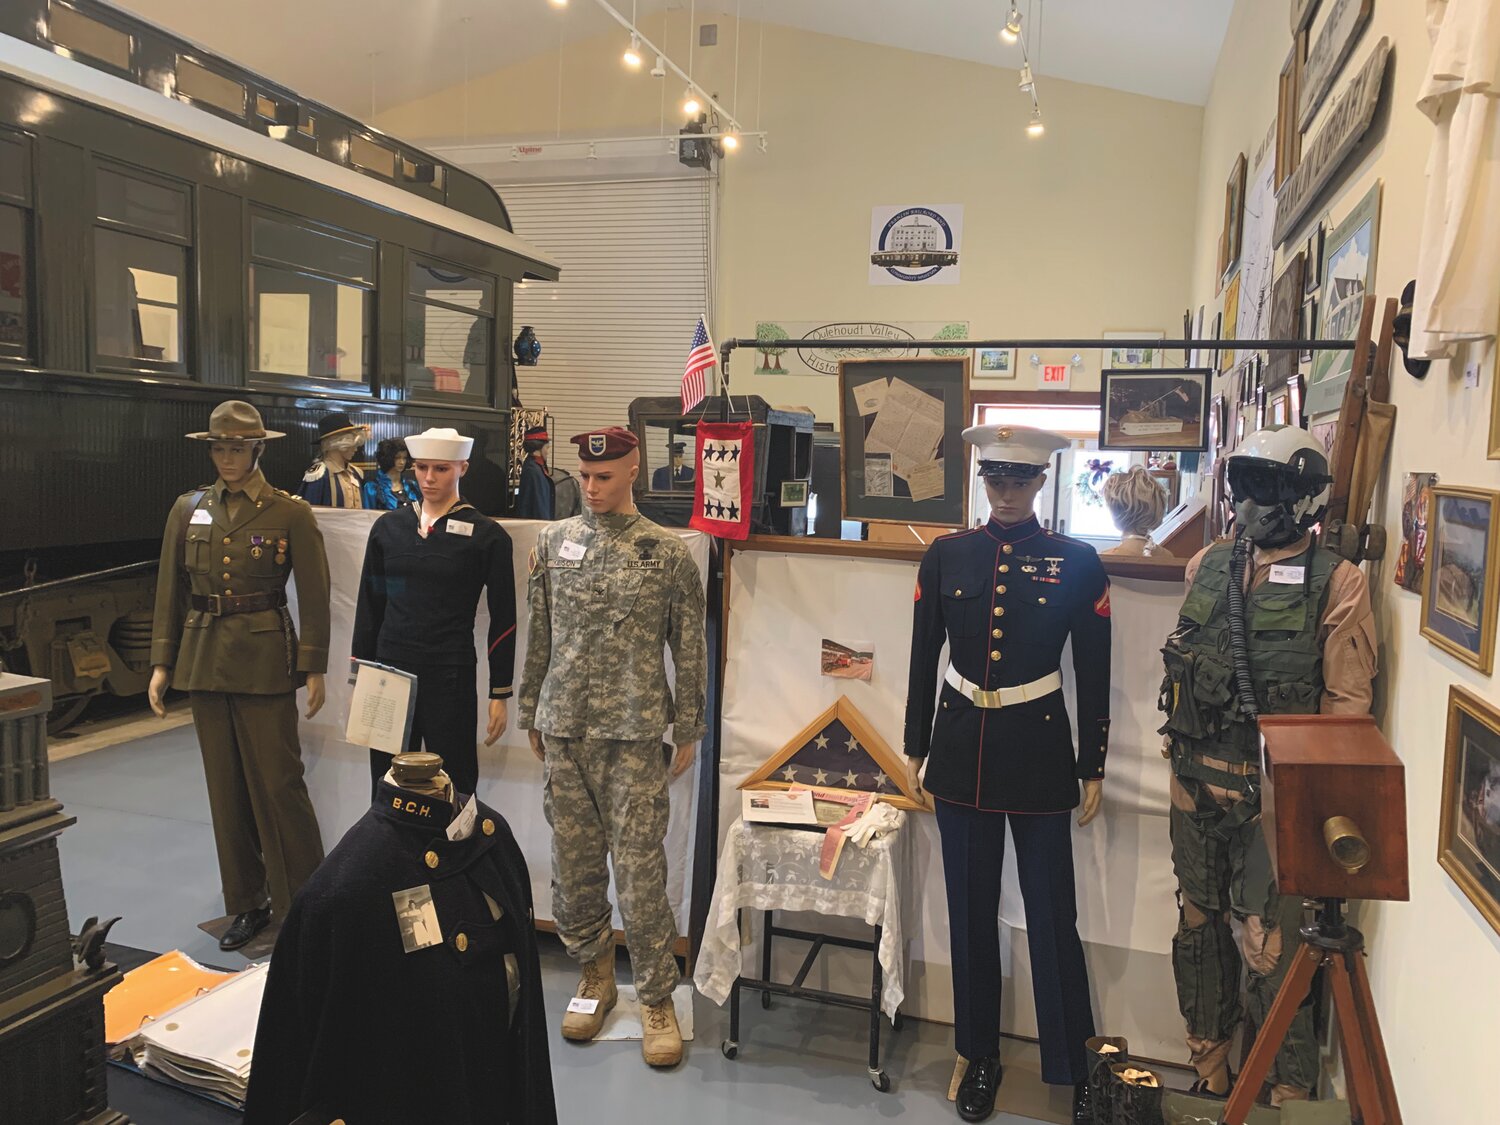 Franklin Railroad and Community Museum military collection  includes military uniforms, supplies and a Civil
War display.